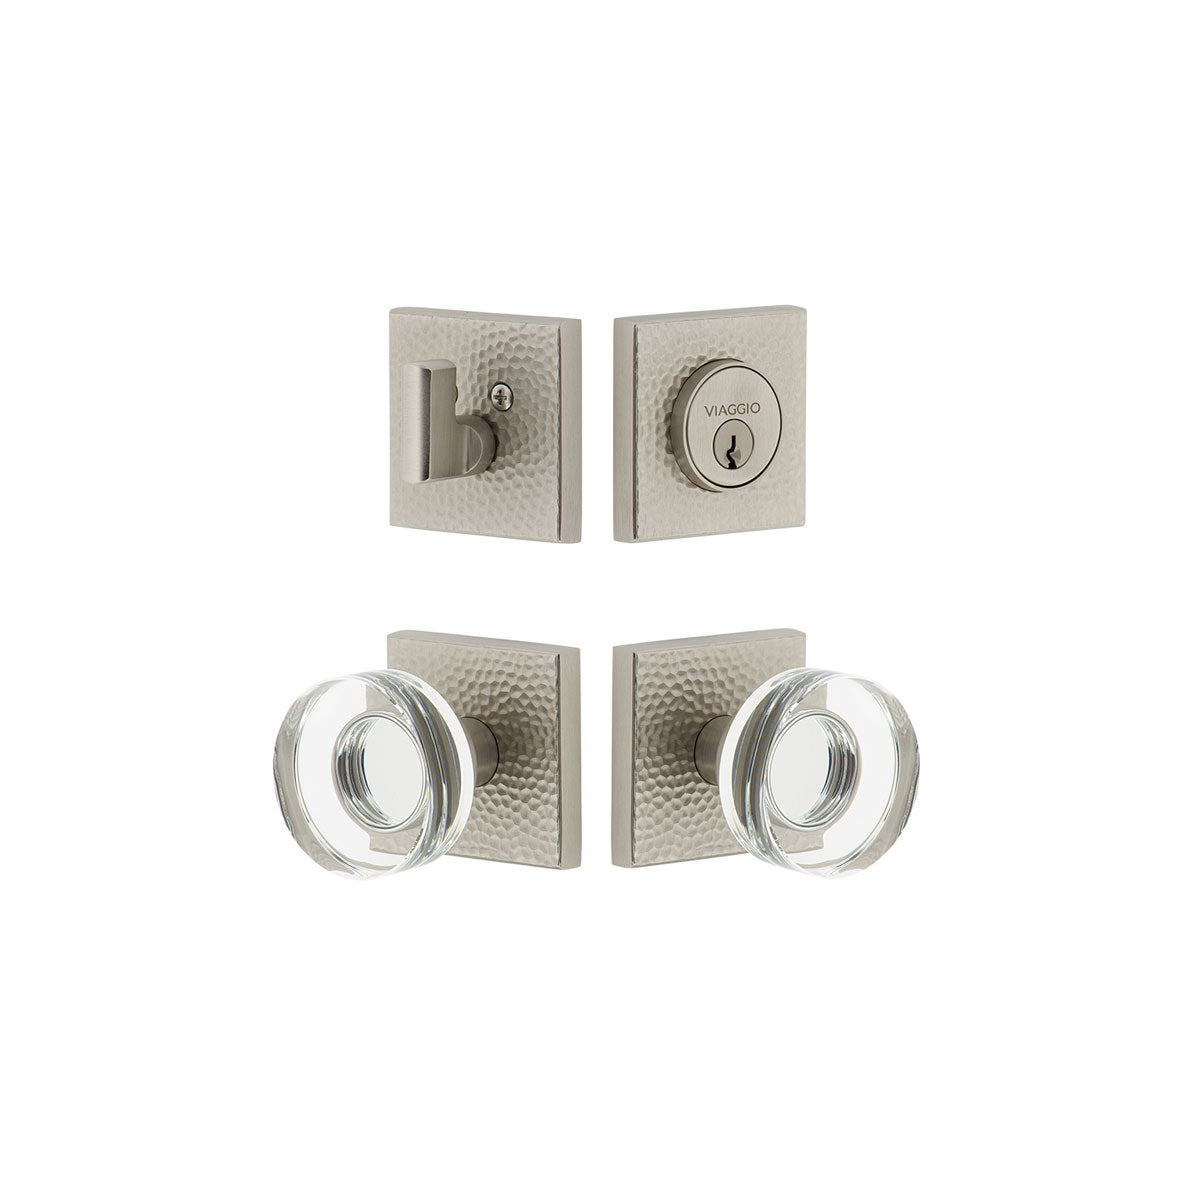 Quadrato Hammered Rosette Entry Set with Circolo Crystal Knob in Satin Nickel